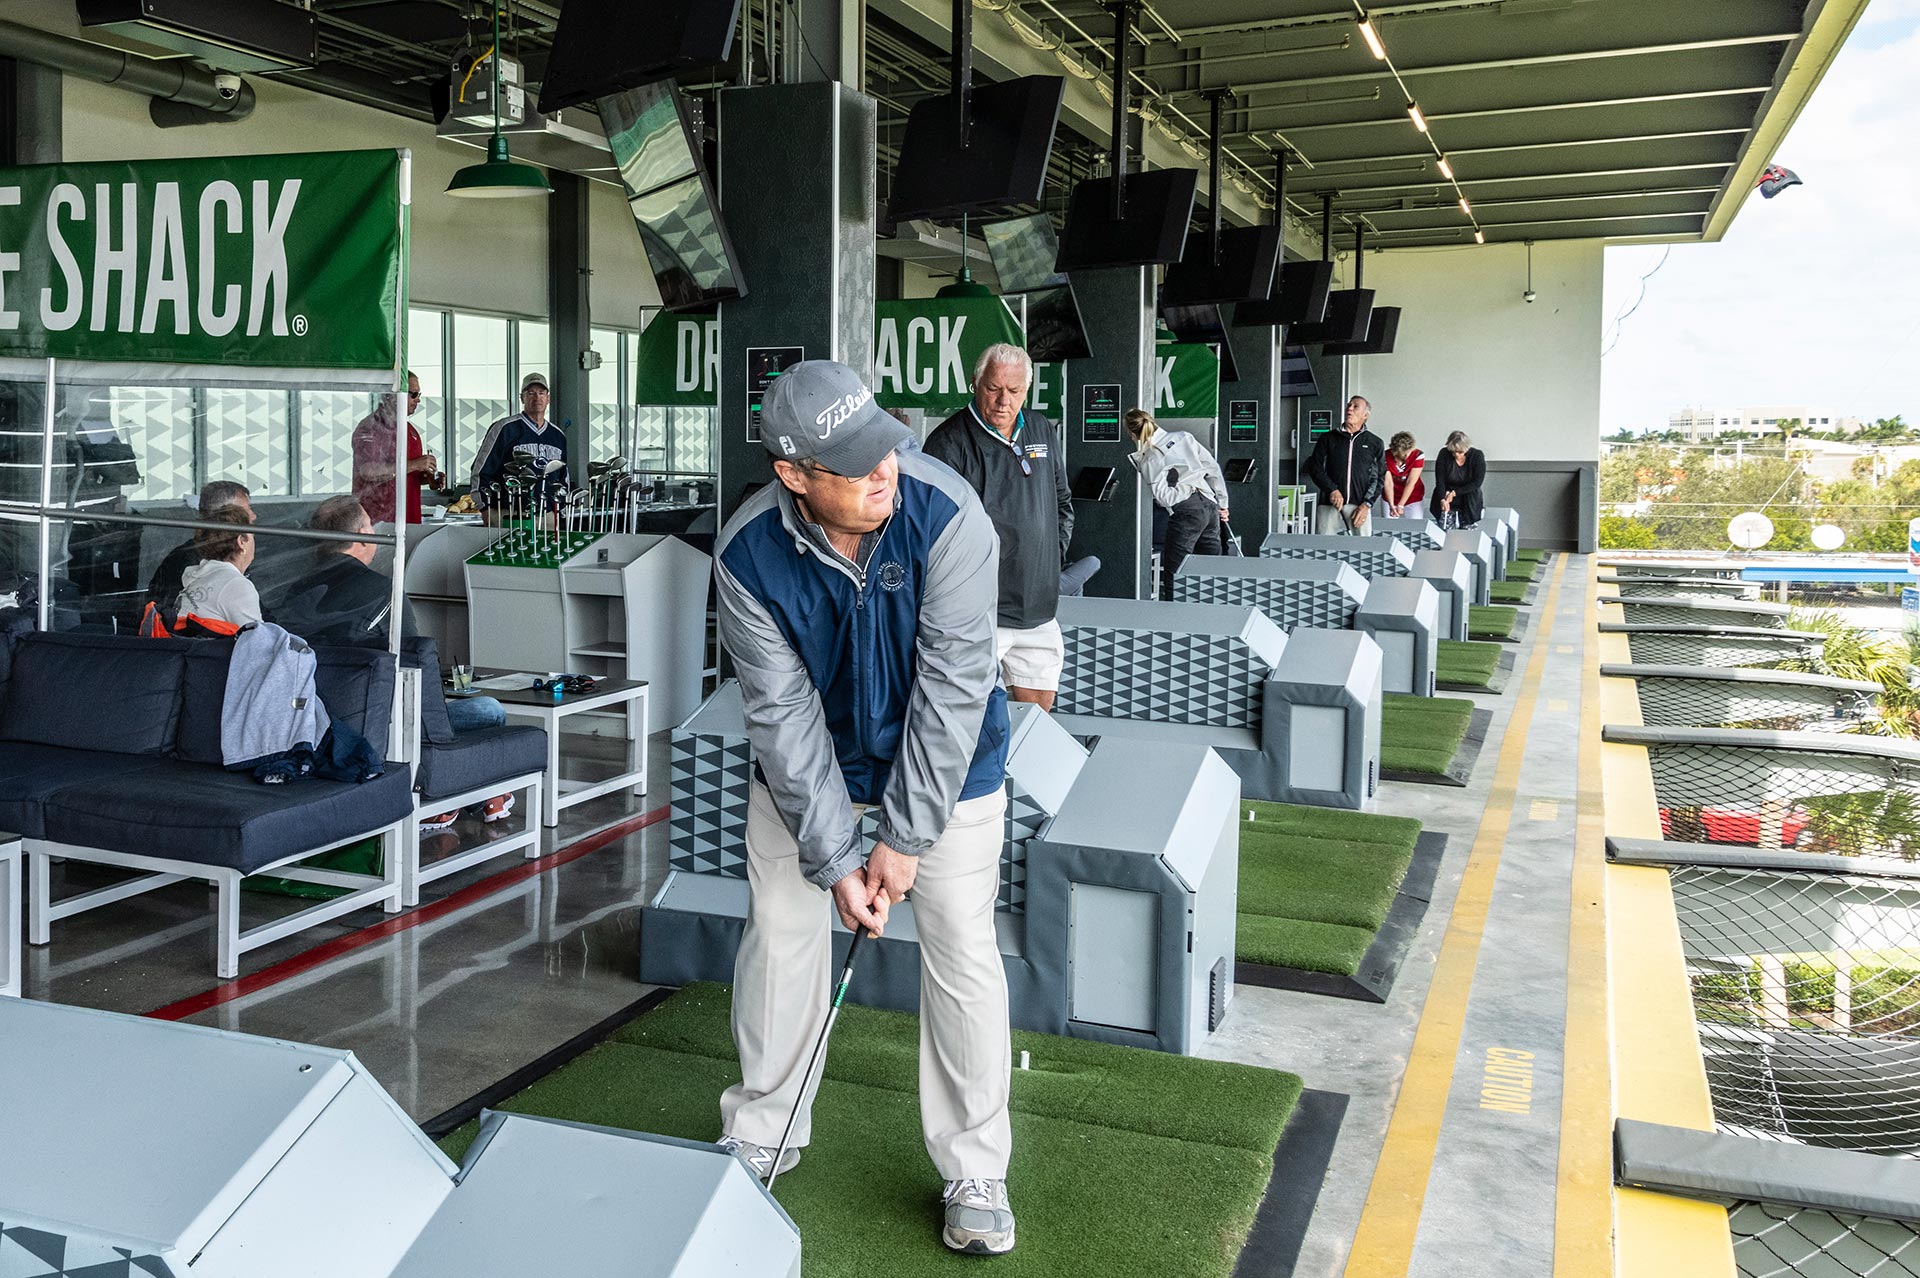 20th Annual Rally - Man Teeing up at Driving Range